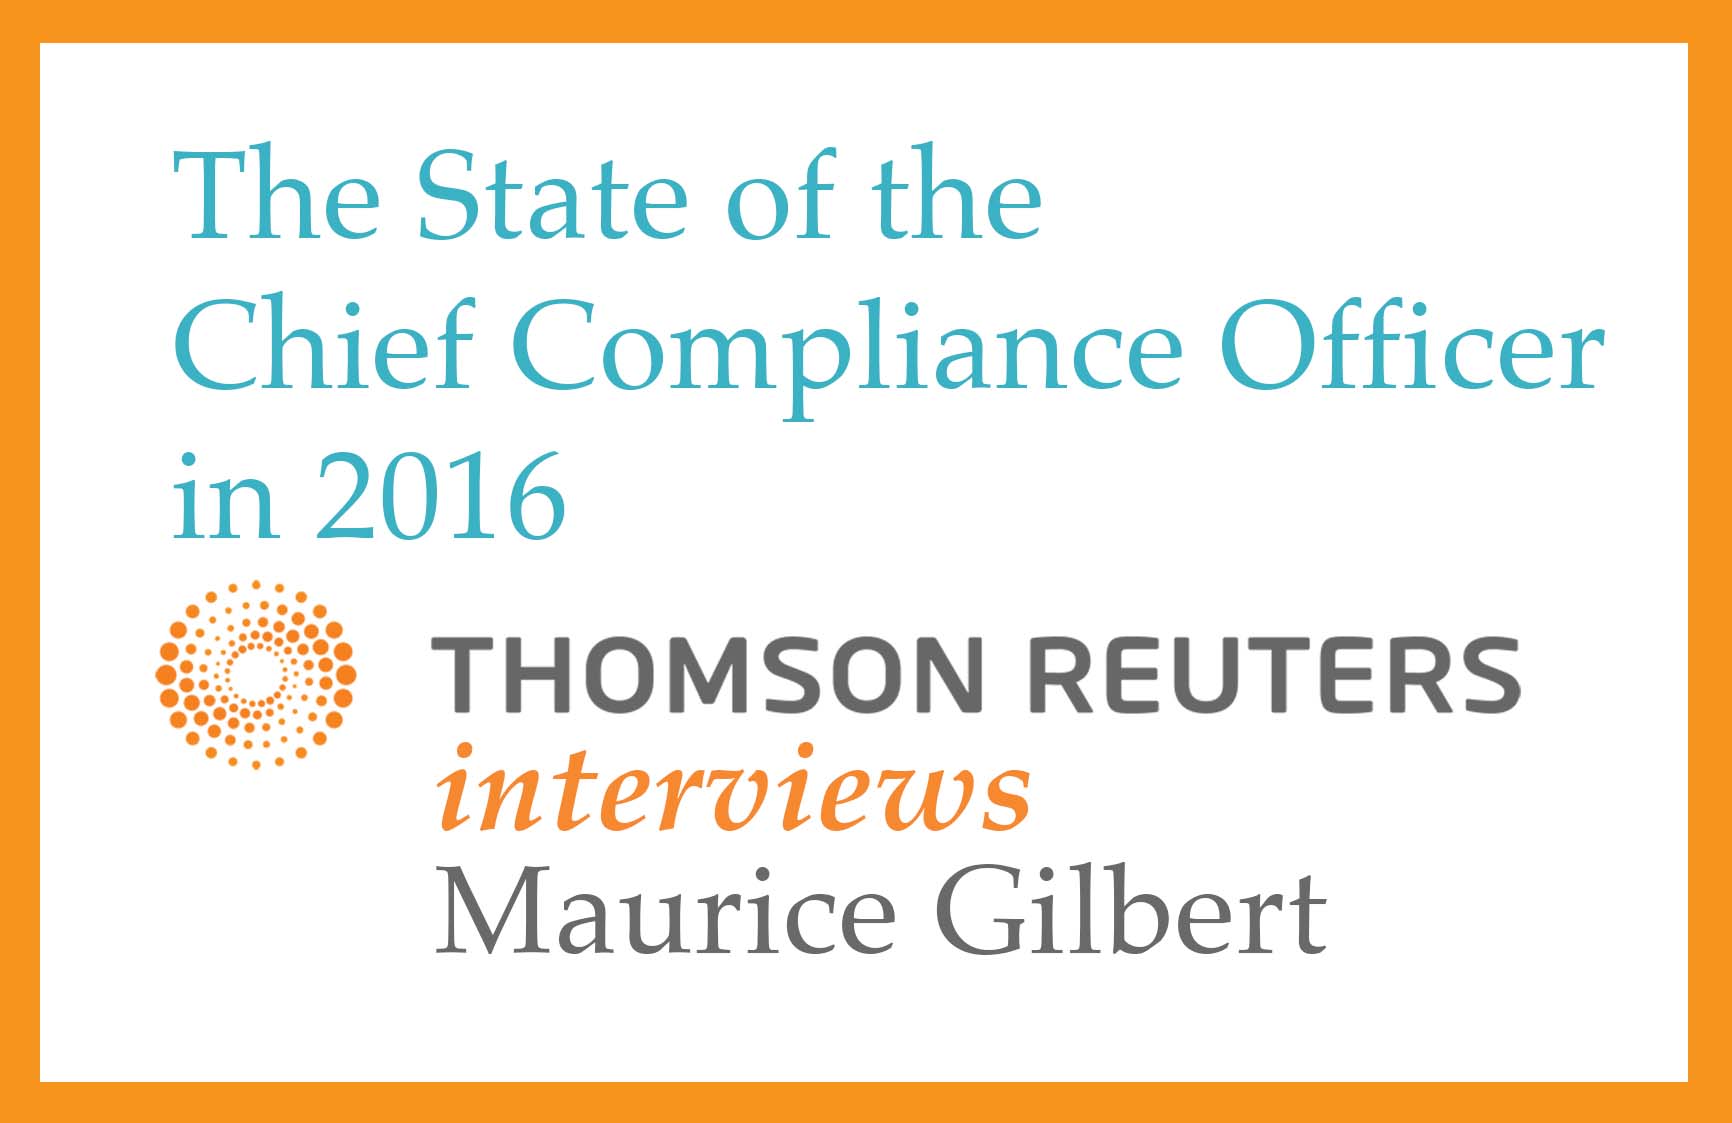 The State of the Chief Compliance Officer in 2016